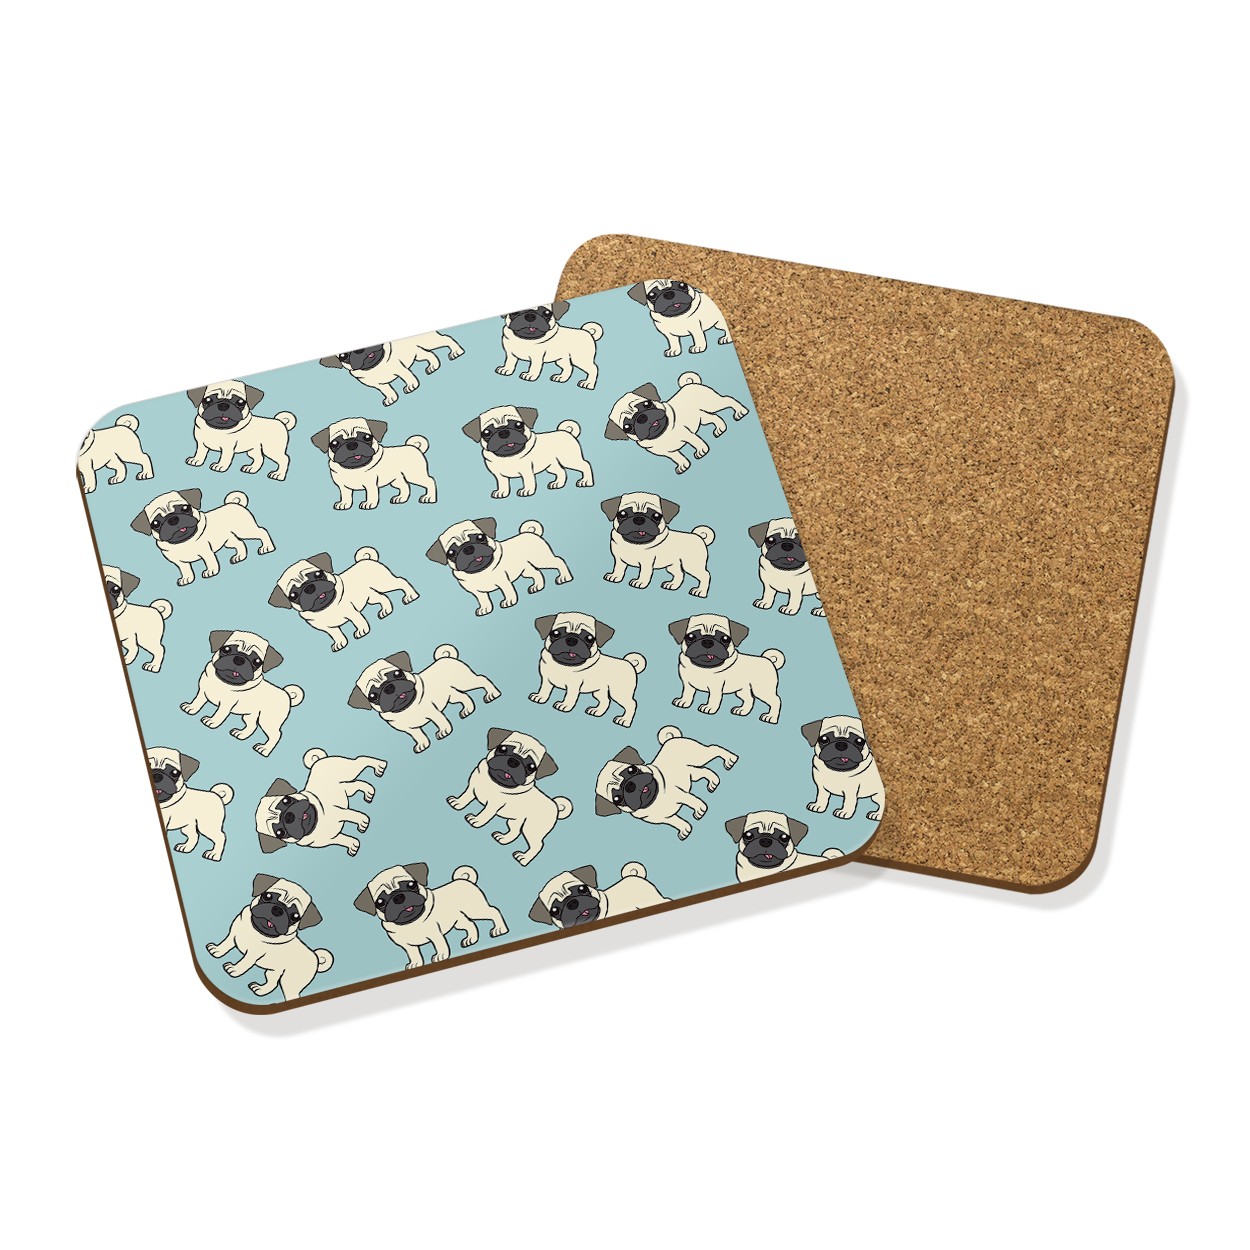 PUGS IN THE SKY PATTERN DRINKS COASTER MAT CORK SQUARE SET X4